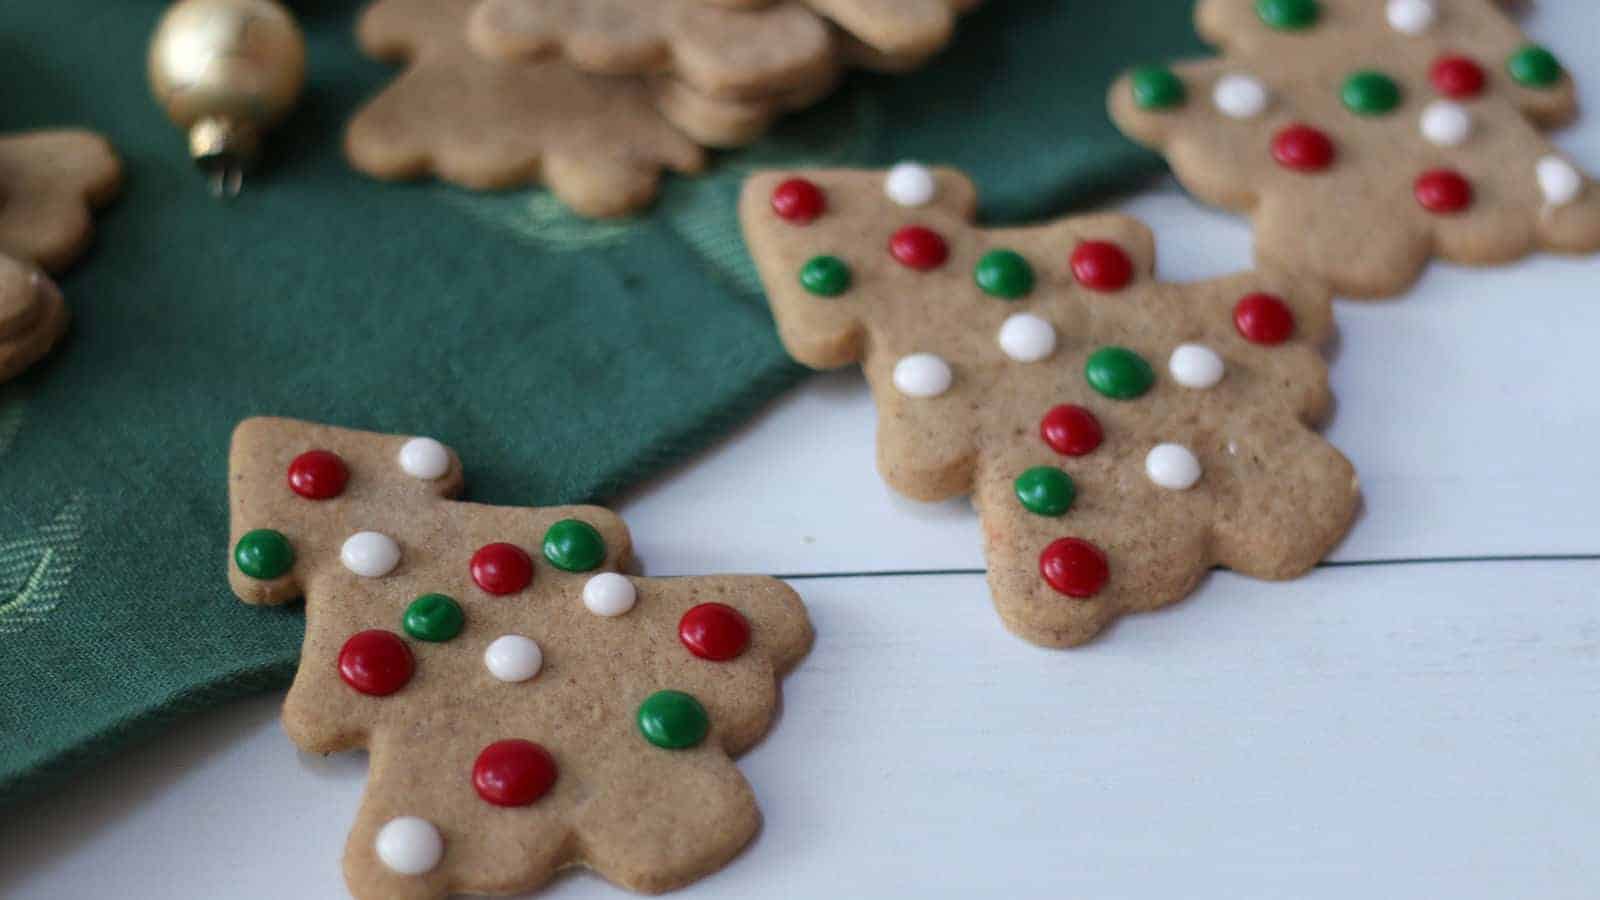 Christmas tree cutout cookies with red, white and green dots of icing.